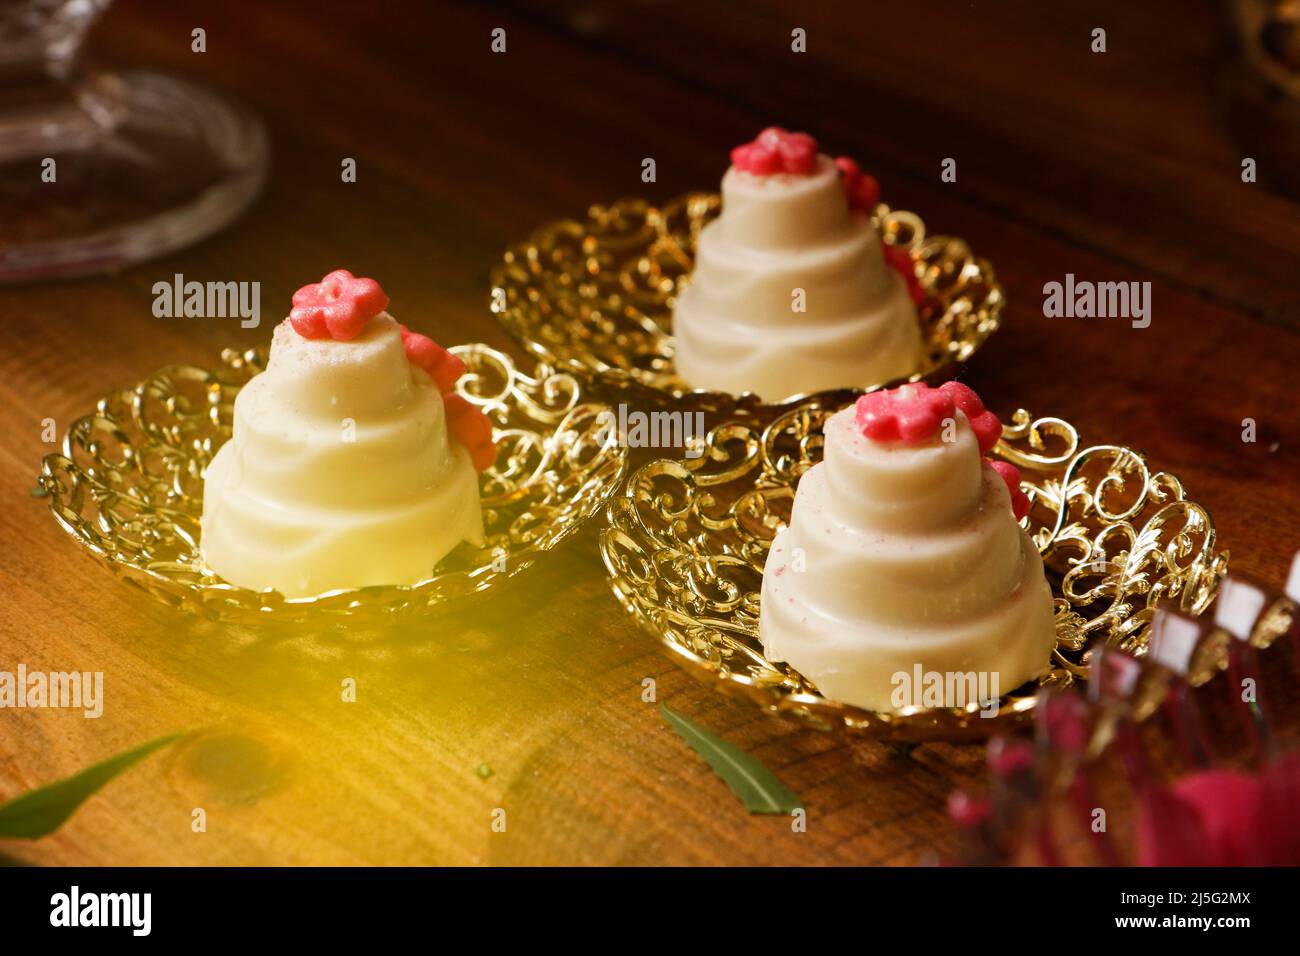 Delicious party sweets in cake design, celebration sweets, reception food Stock Photo